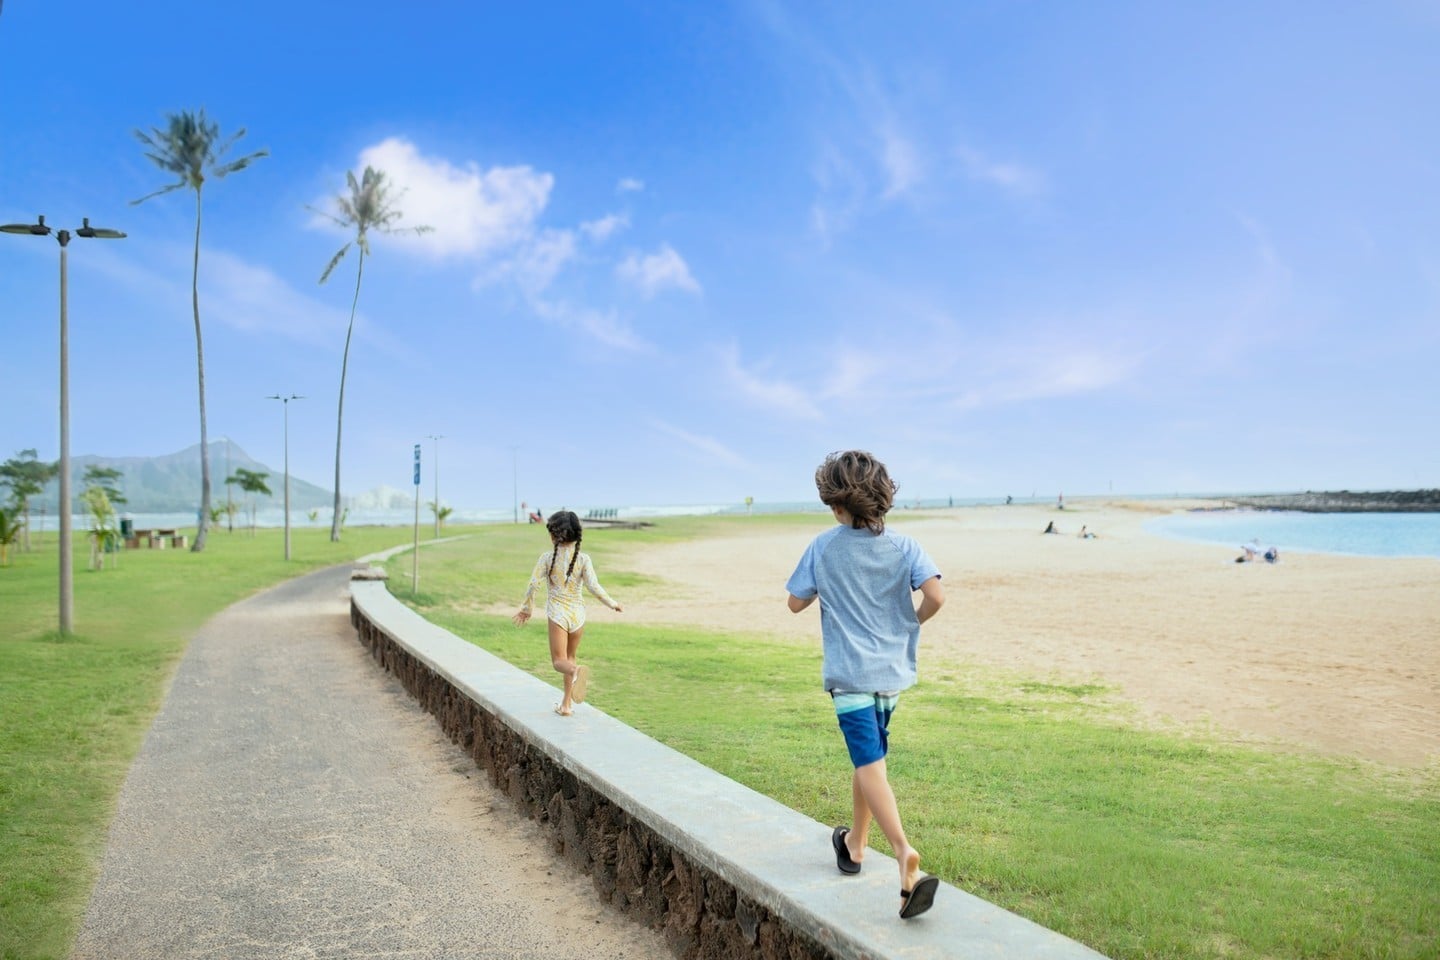 Enjoy the last days of summer outdoors! The parks and green spaces throughout the neighborhood are perfect for leisure and lounging, picnics and play time, fitness and more. #wardvillage #hawaii #luckytolivehawaii